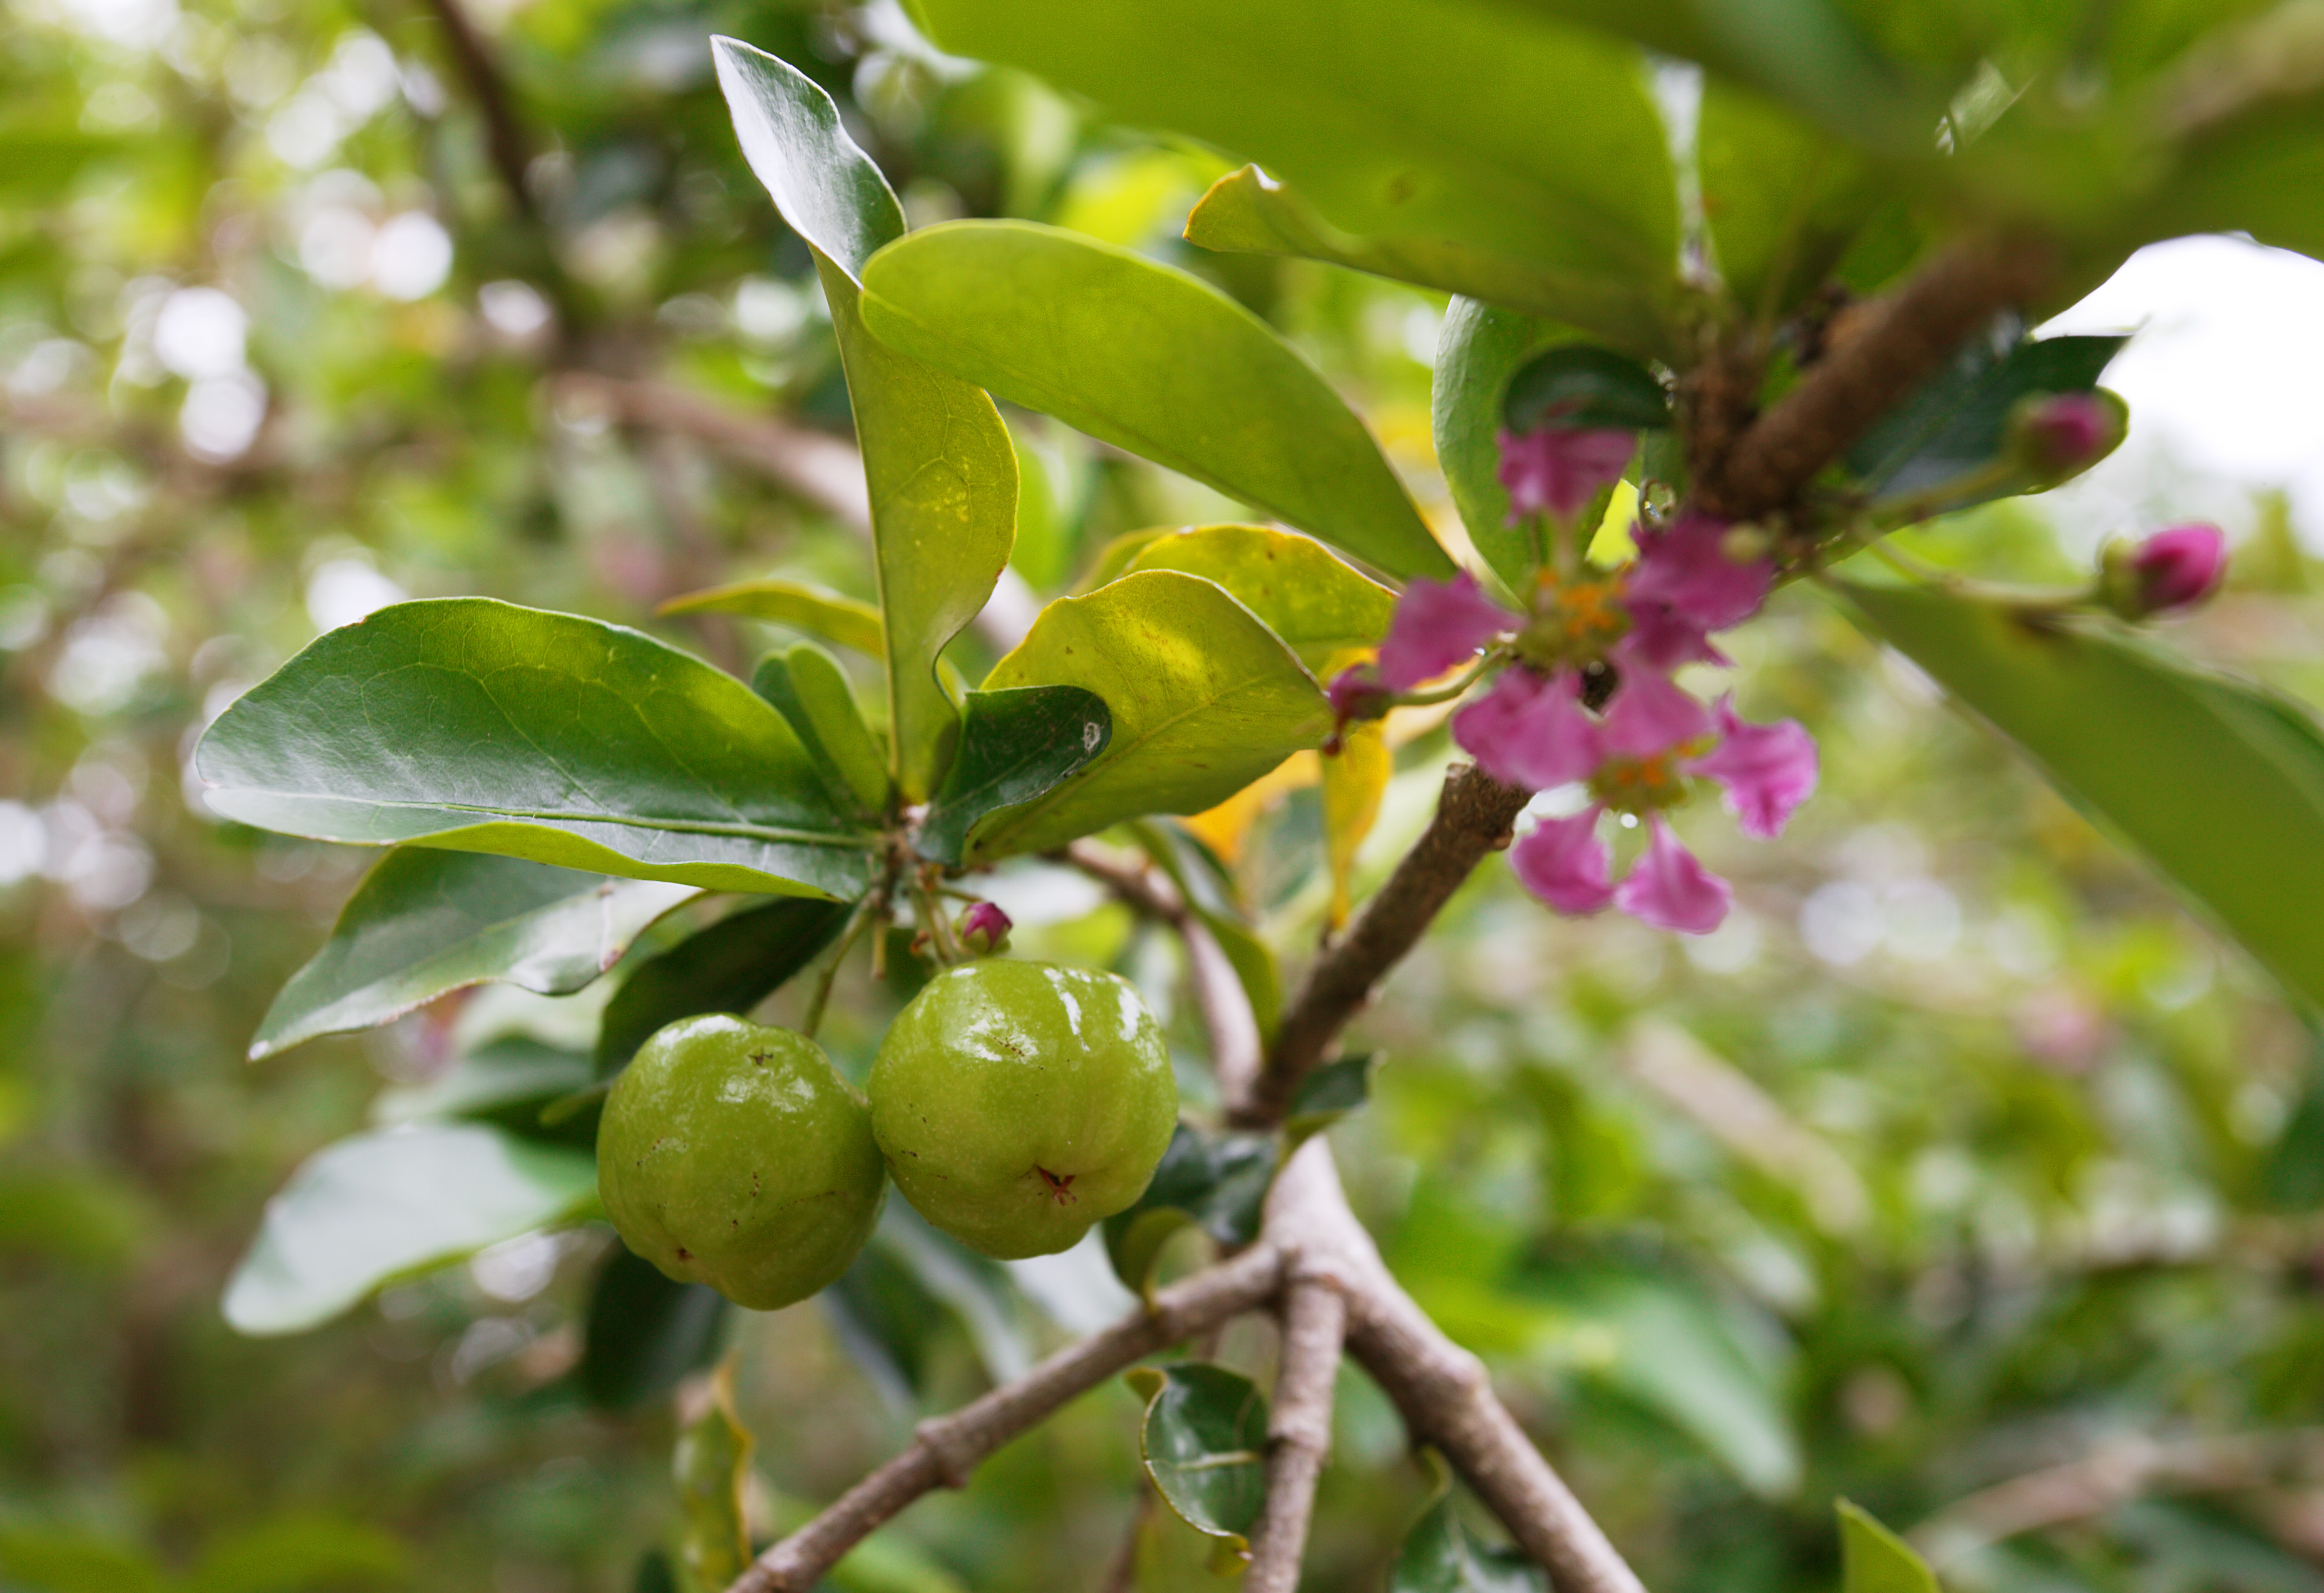 photo,material,free,landscape,picture,stock photo,Creative Commons,A young fruit of acerola, Acerola, Pink, flower, Fruit